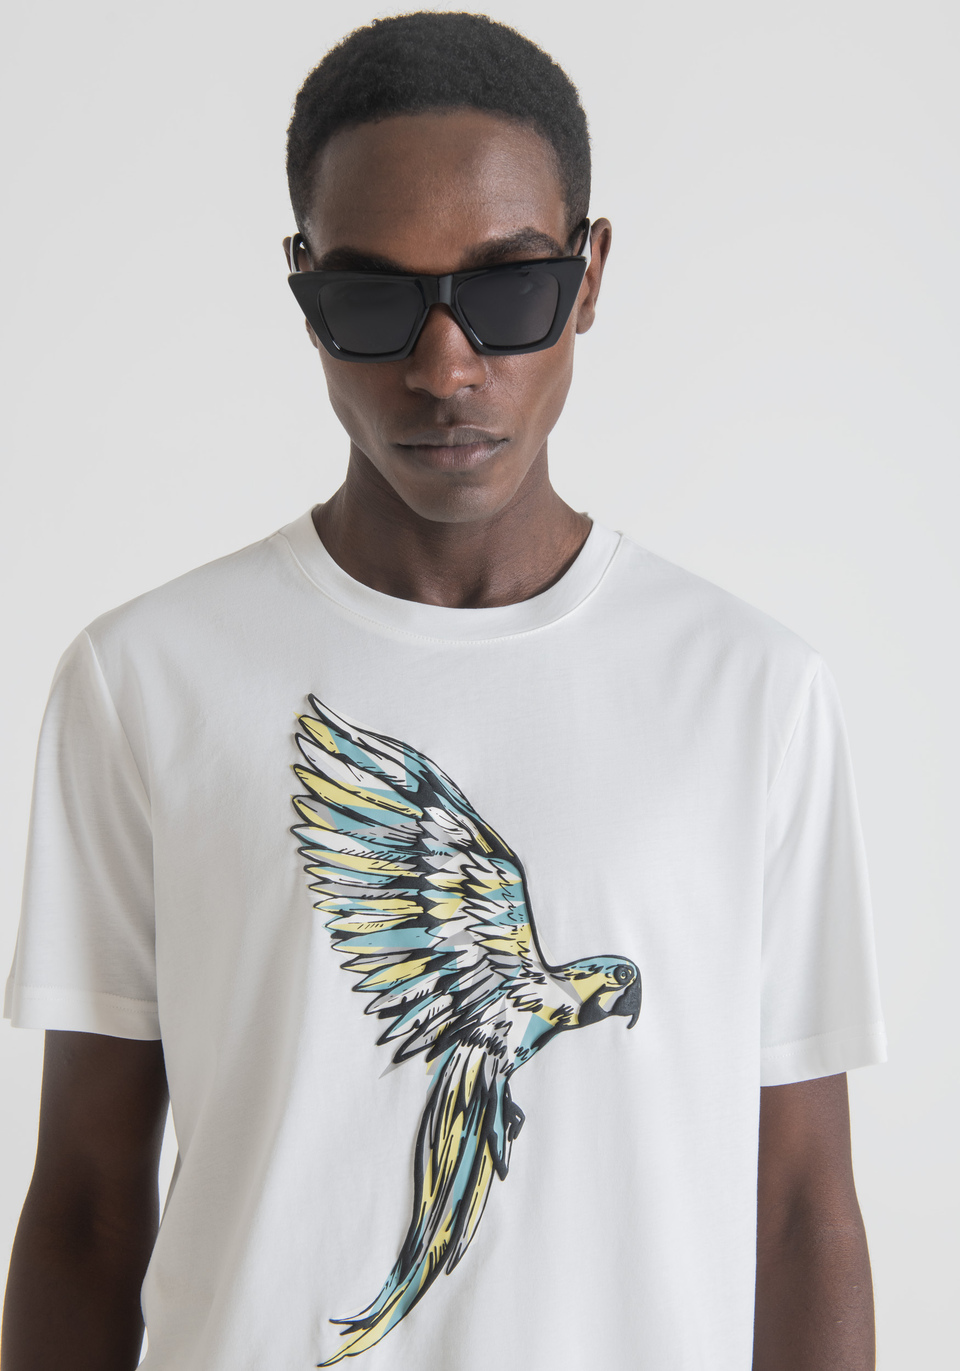 REGULAR-FIT T-SHIRT IN PURE COTTON WITH PARROT PRINT - Antony Morato Online Shop